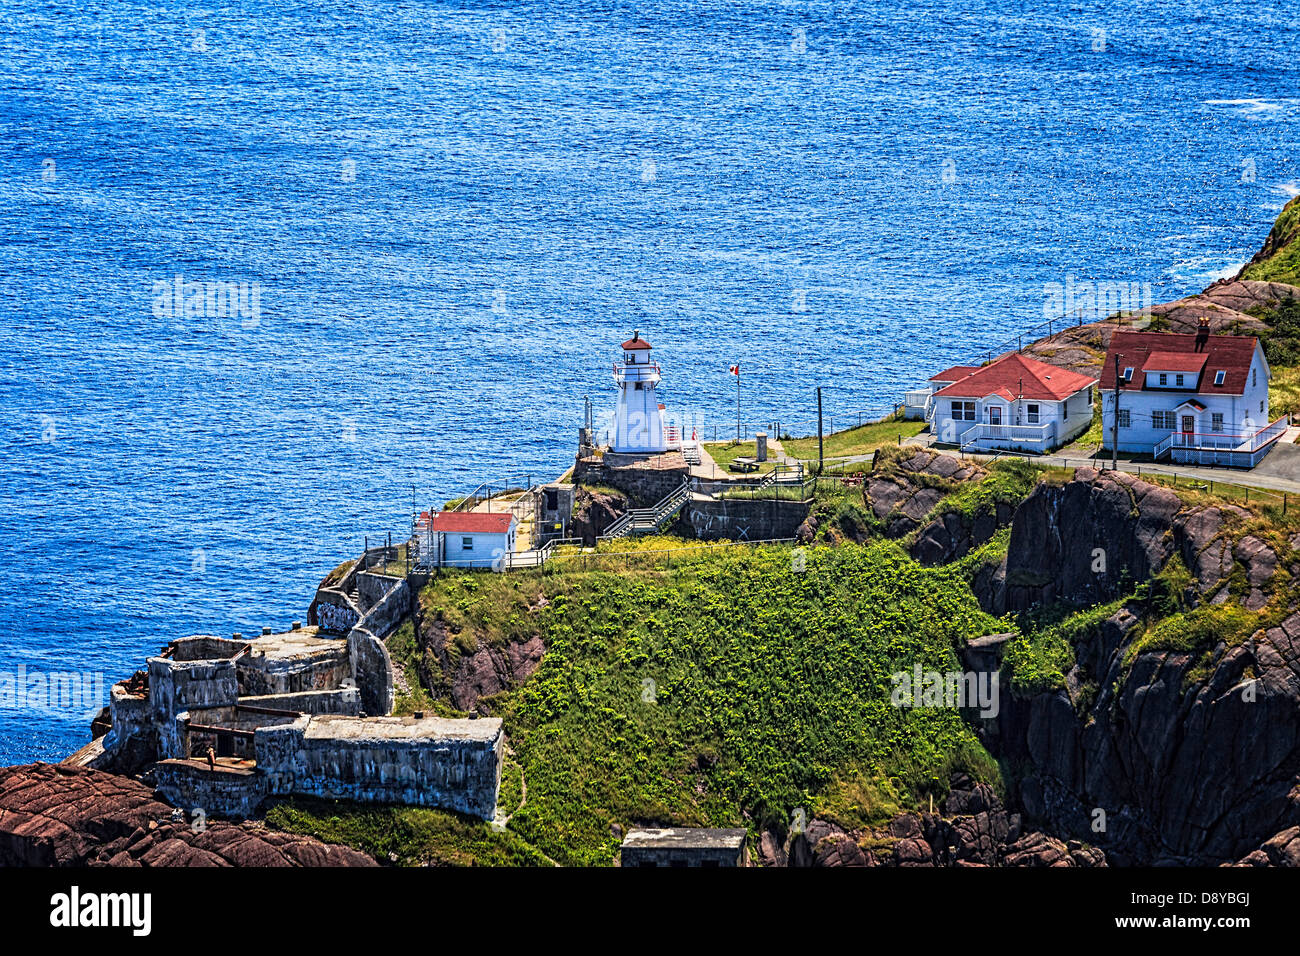 Fort Amherst Lighthouse, on the south side of St. John's Harbour, Newfoundland and Labrador, Canada. Stock Photo